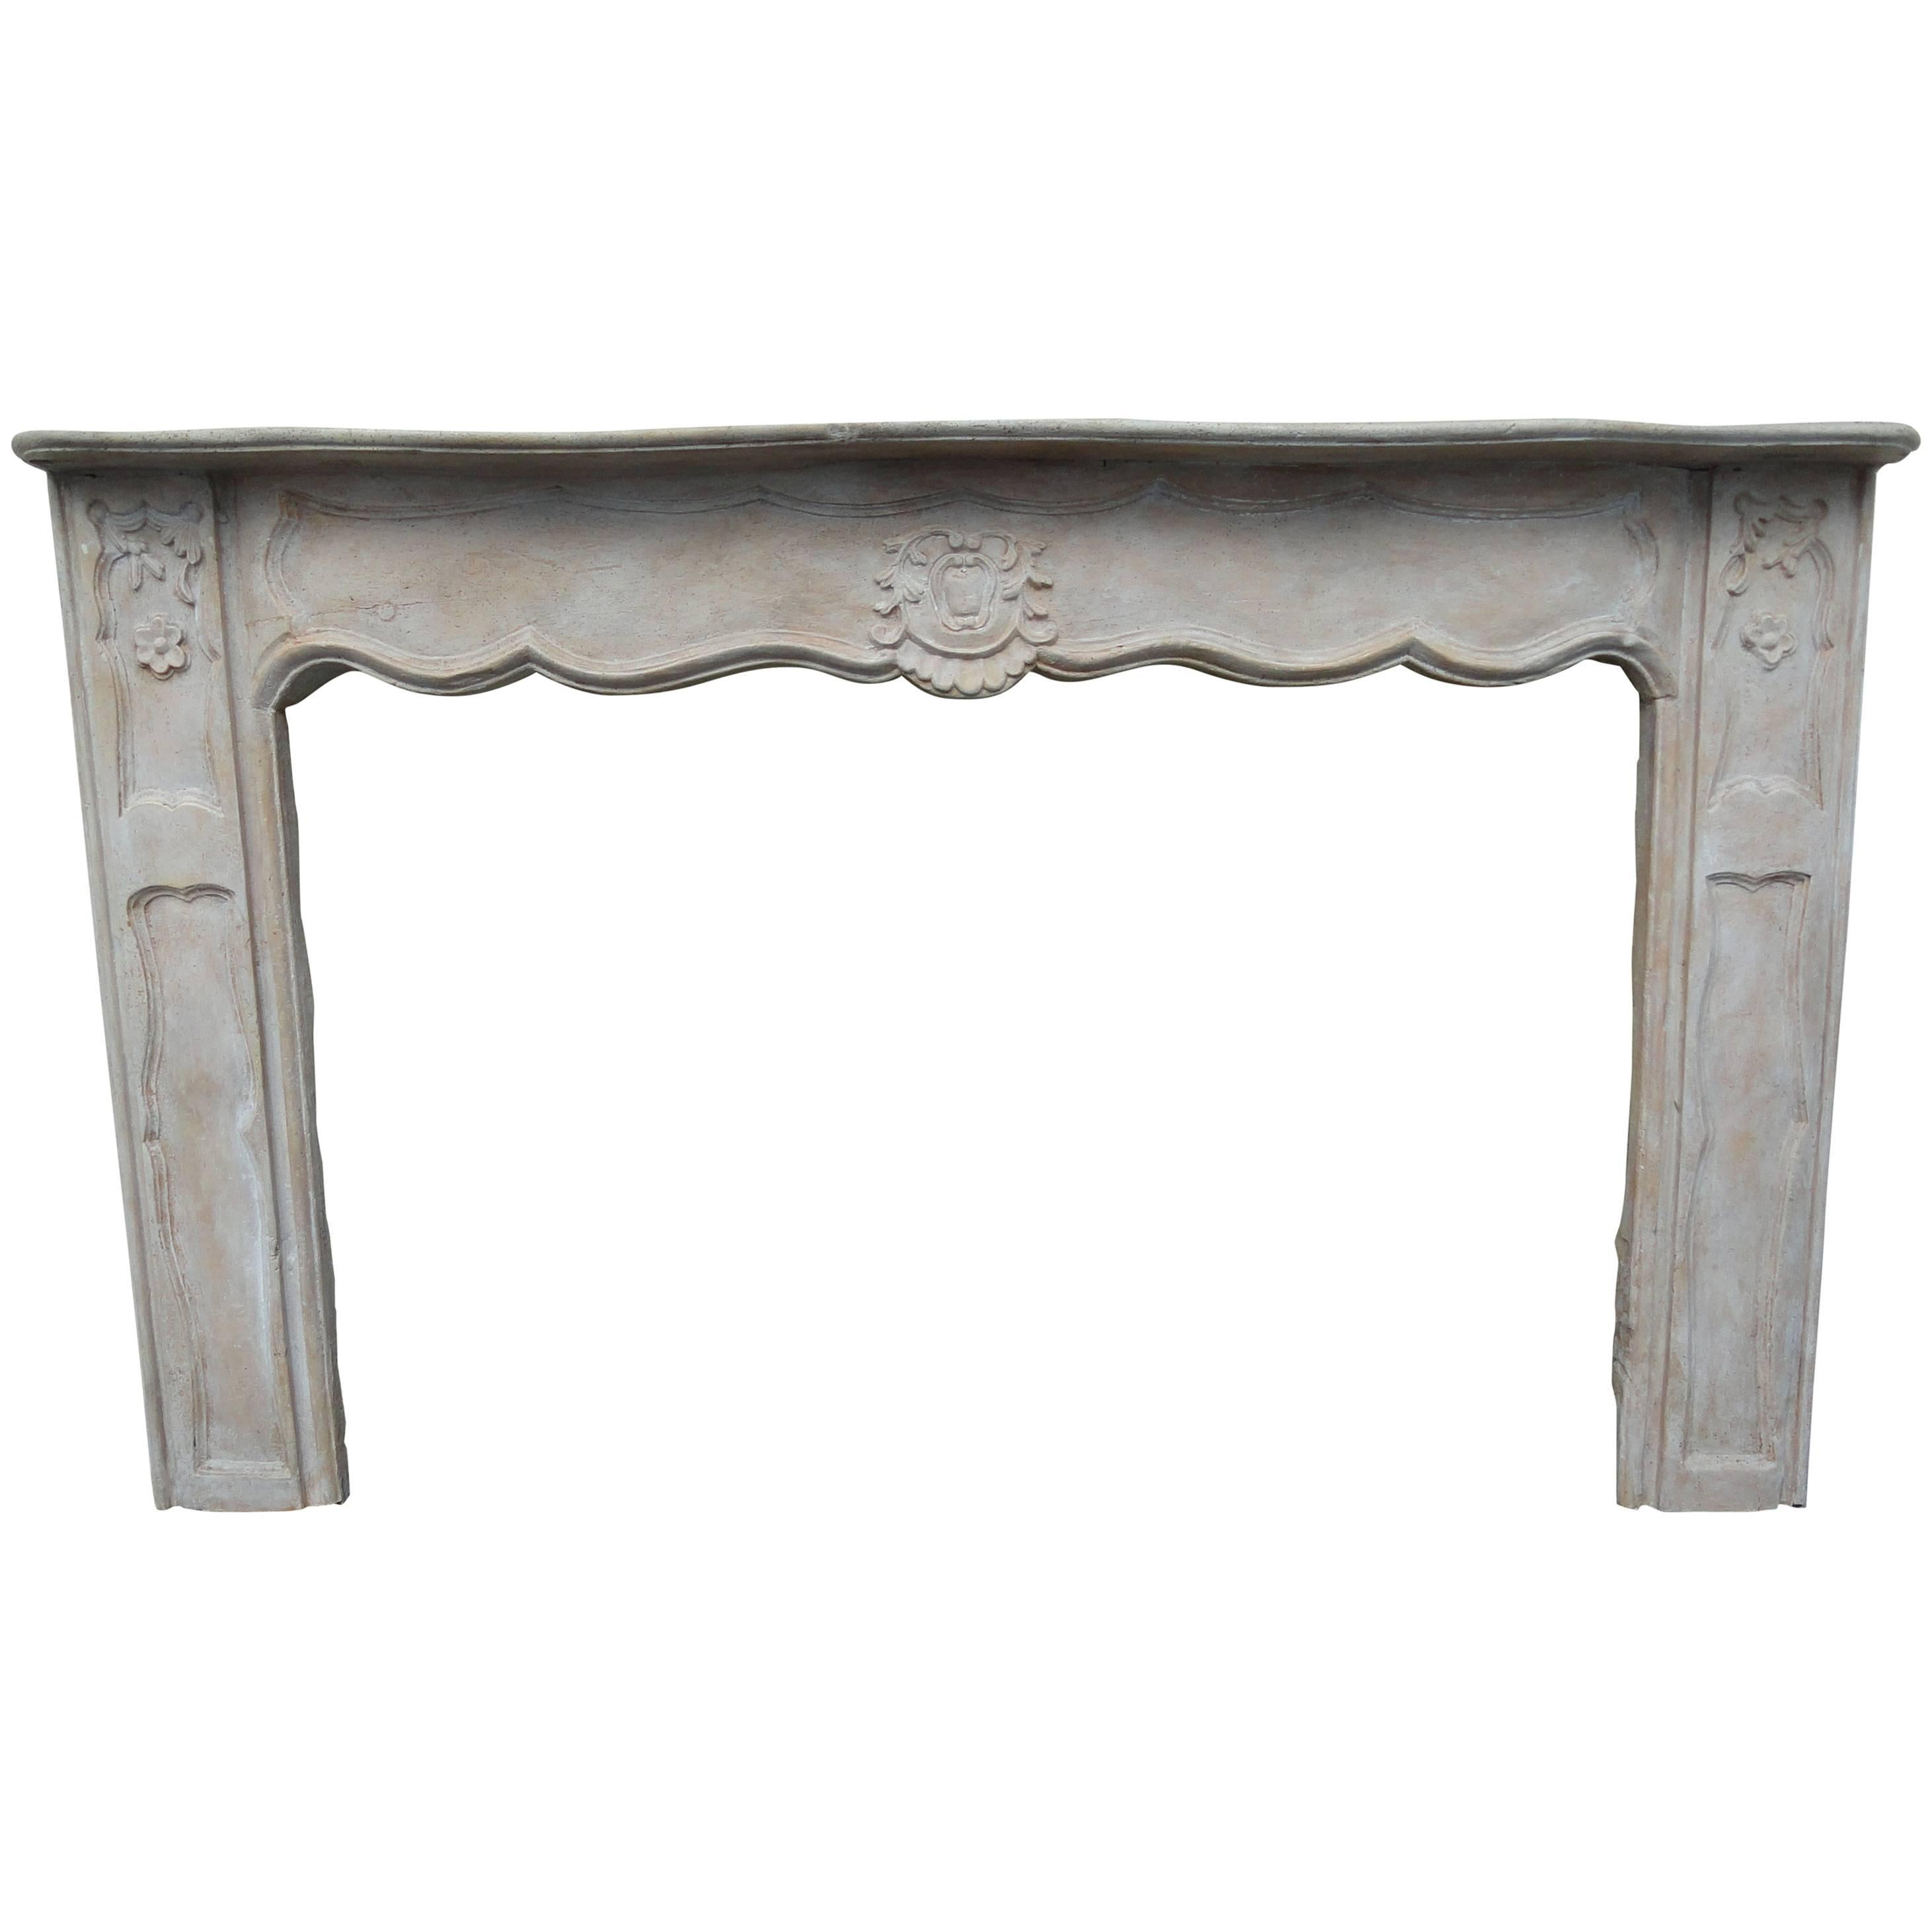 19th Century French Wood Mantel For Sale